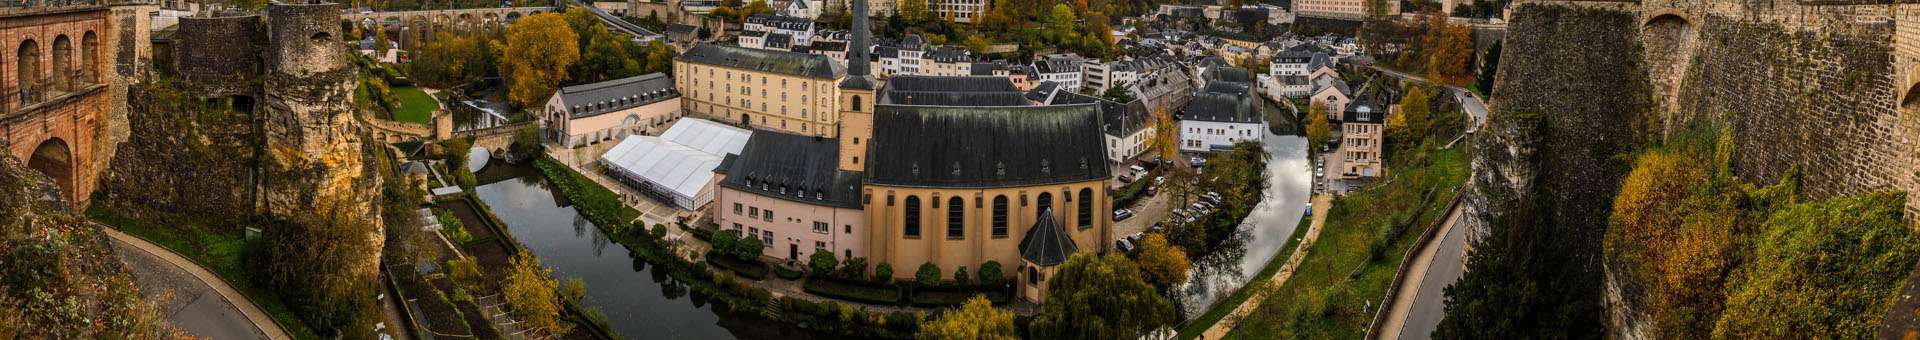 Search Whois information of domain names in Luxembourg